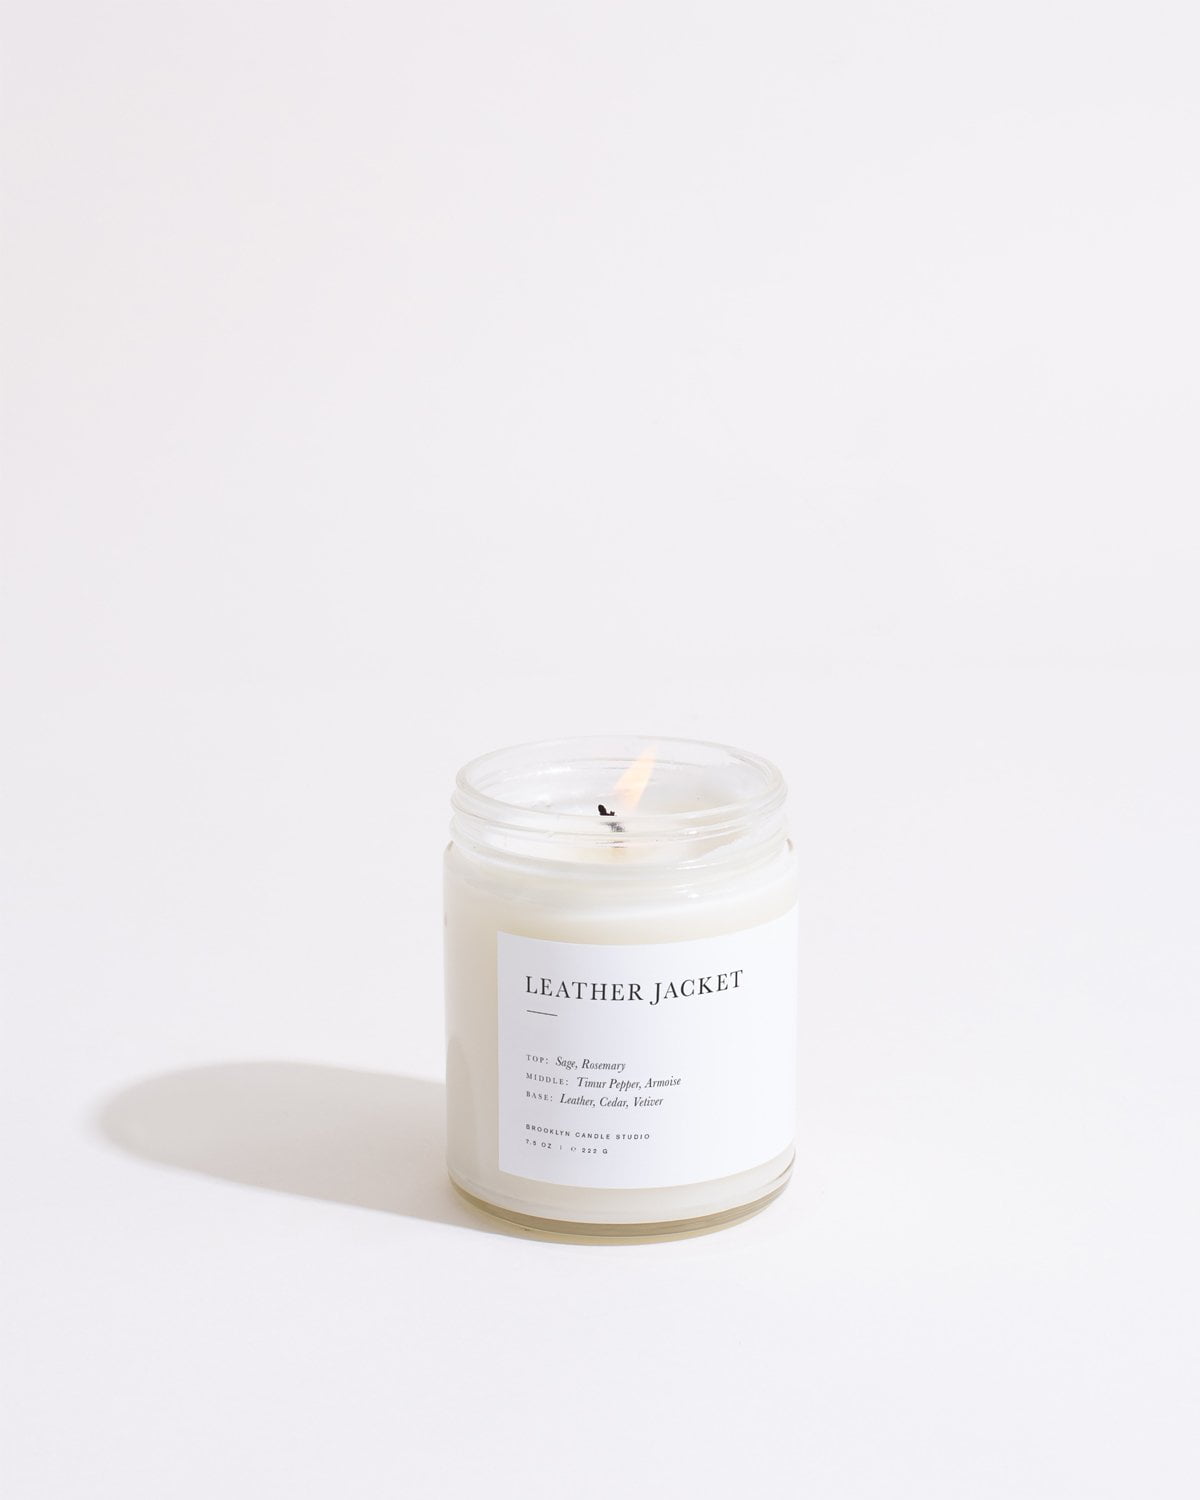 A lit candle in a transparent glass jar labeled "LEATHER JACKET" by Brooklyn Candle Studio is placed on a white surface. The label lists notes of various scents: "Soy, Fairmount, Burch, Honey, Jasmine, Leather, Mint, Lime." This eco-friendly Leather Jacket Minimalist Candle throws a soft glow with its shadow visible.